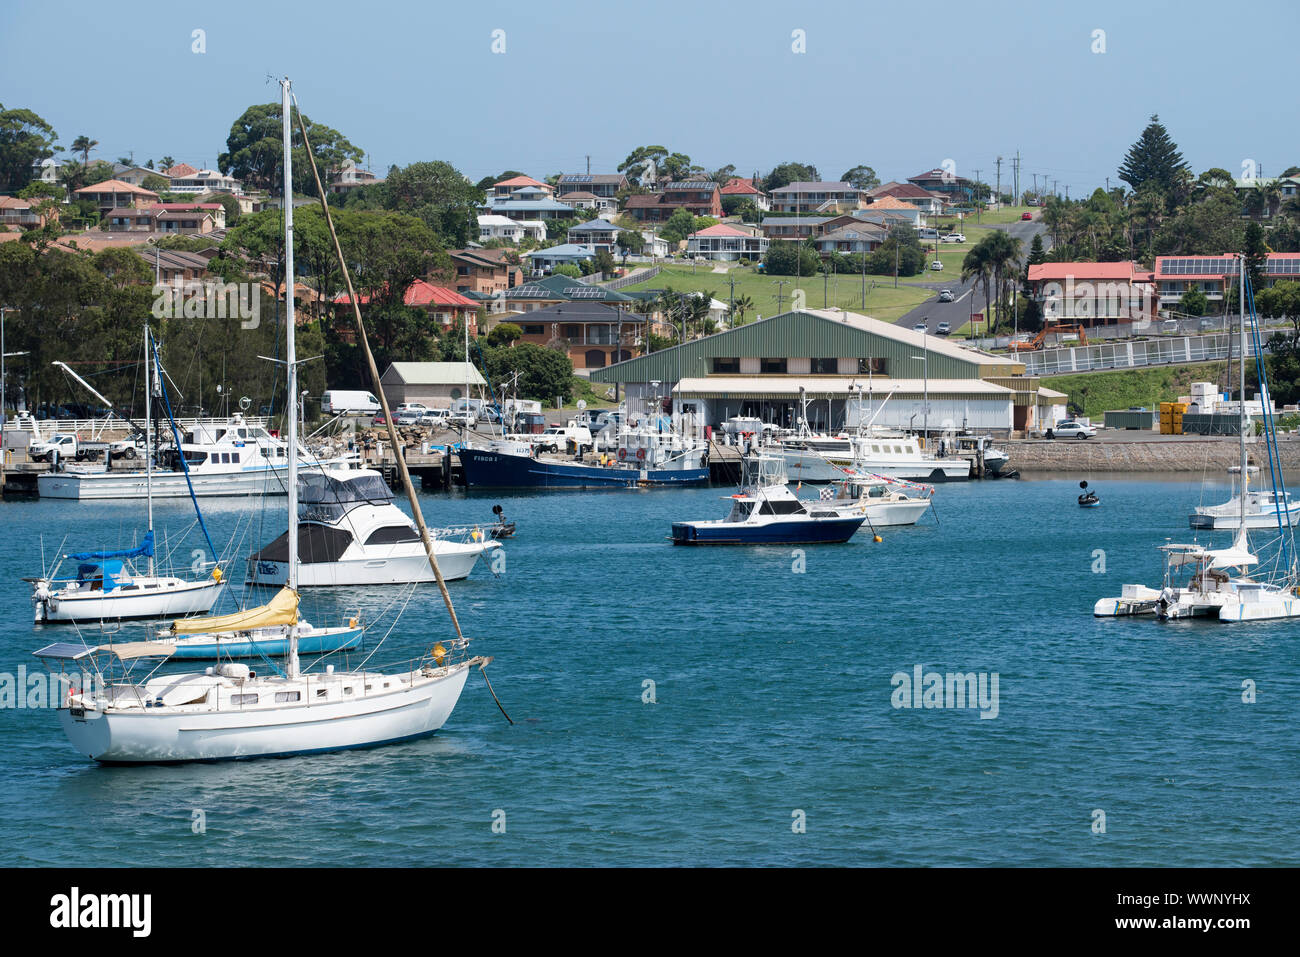 Large fishing trawlers and smaller recreational boats are moored in the harbour and at the marina in front of the Ulladulla Fisherman Co-op building. Stock Photo